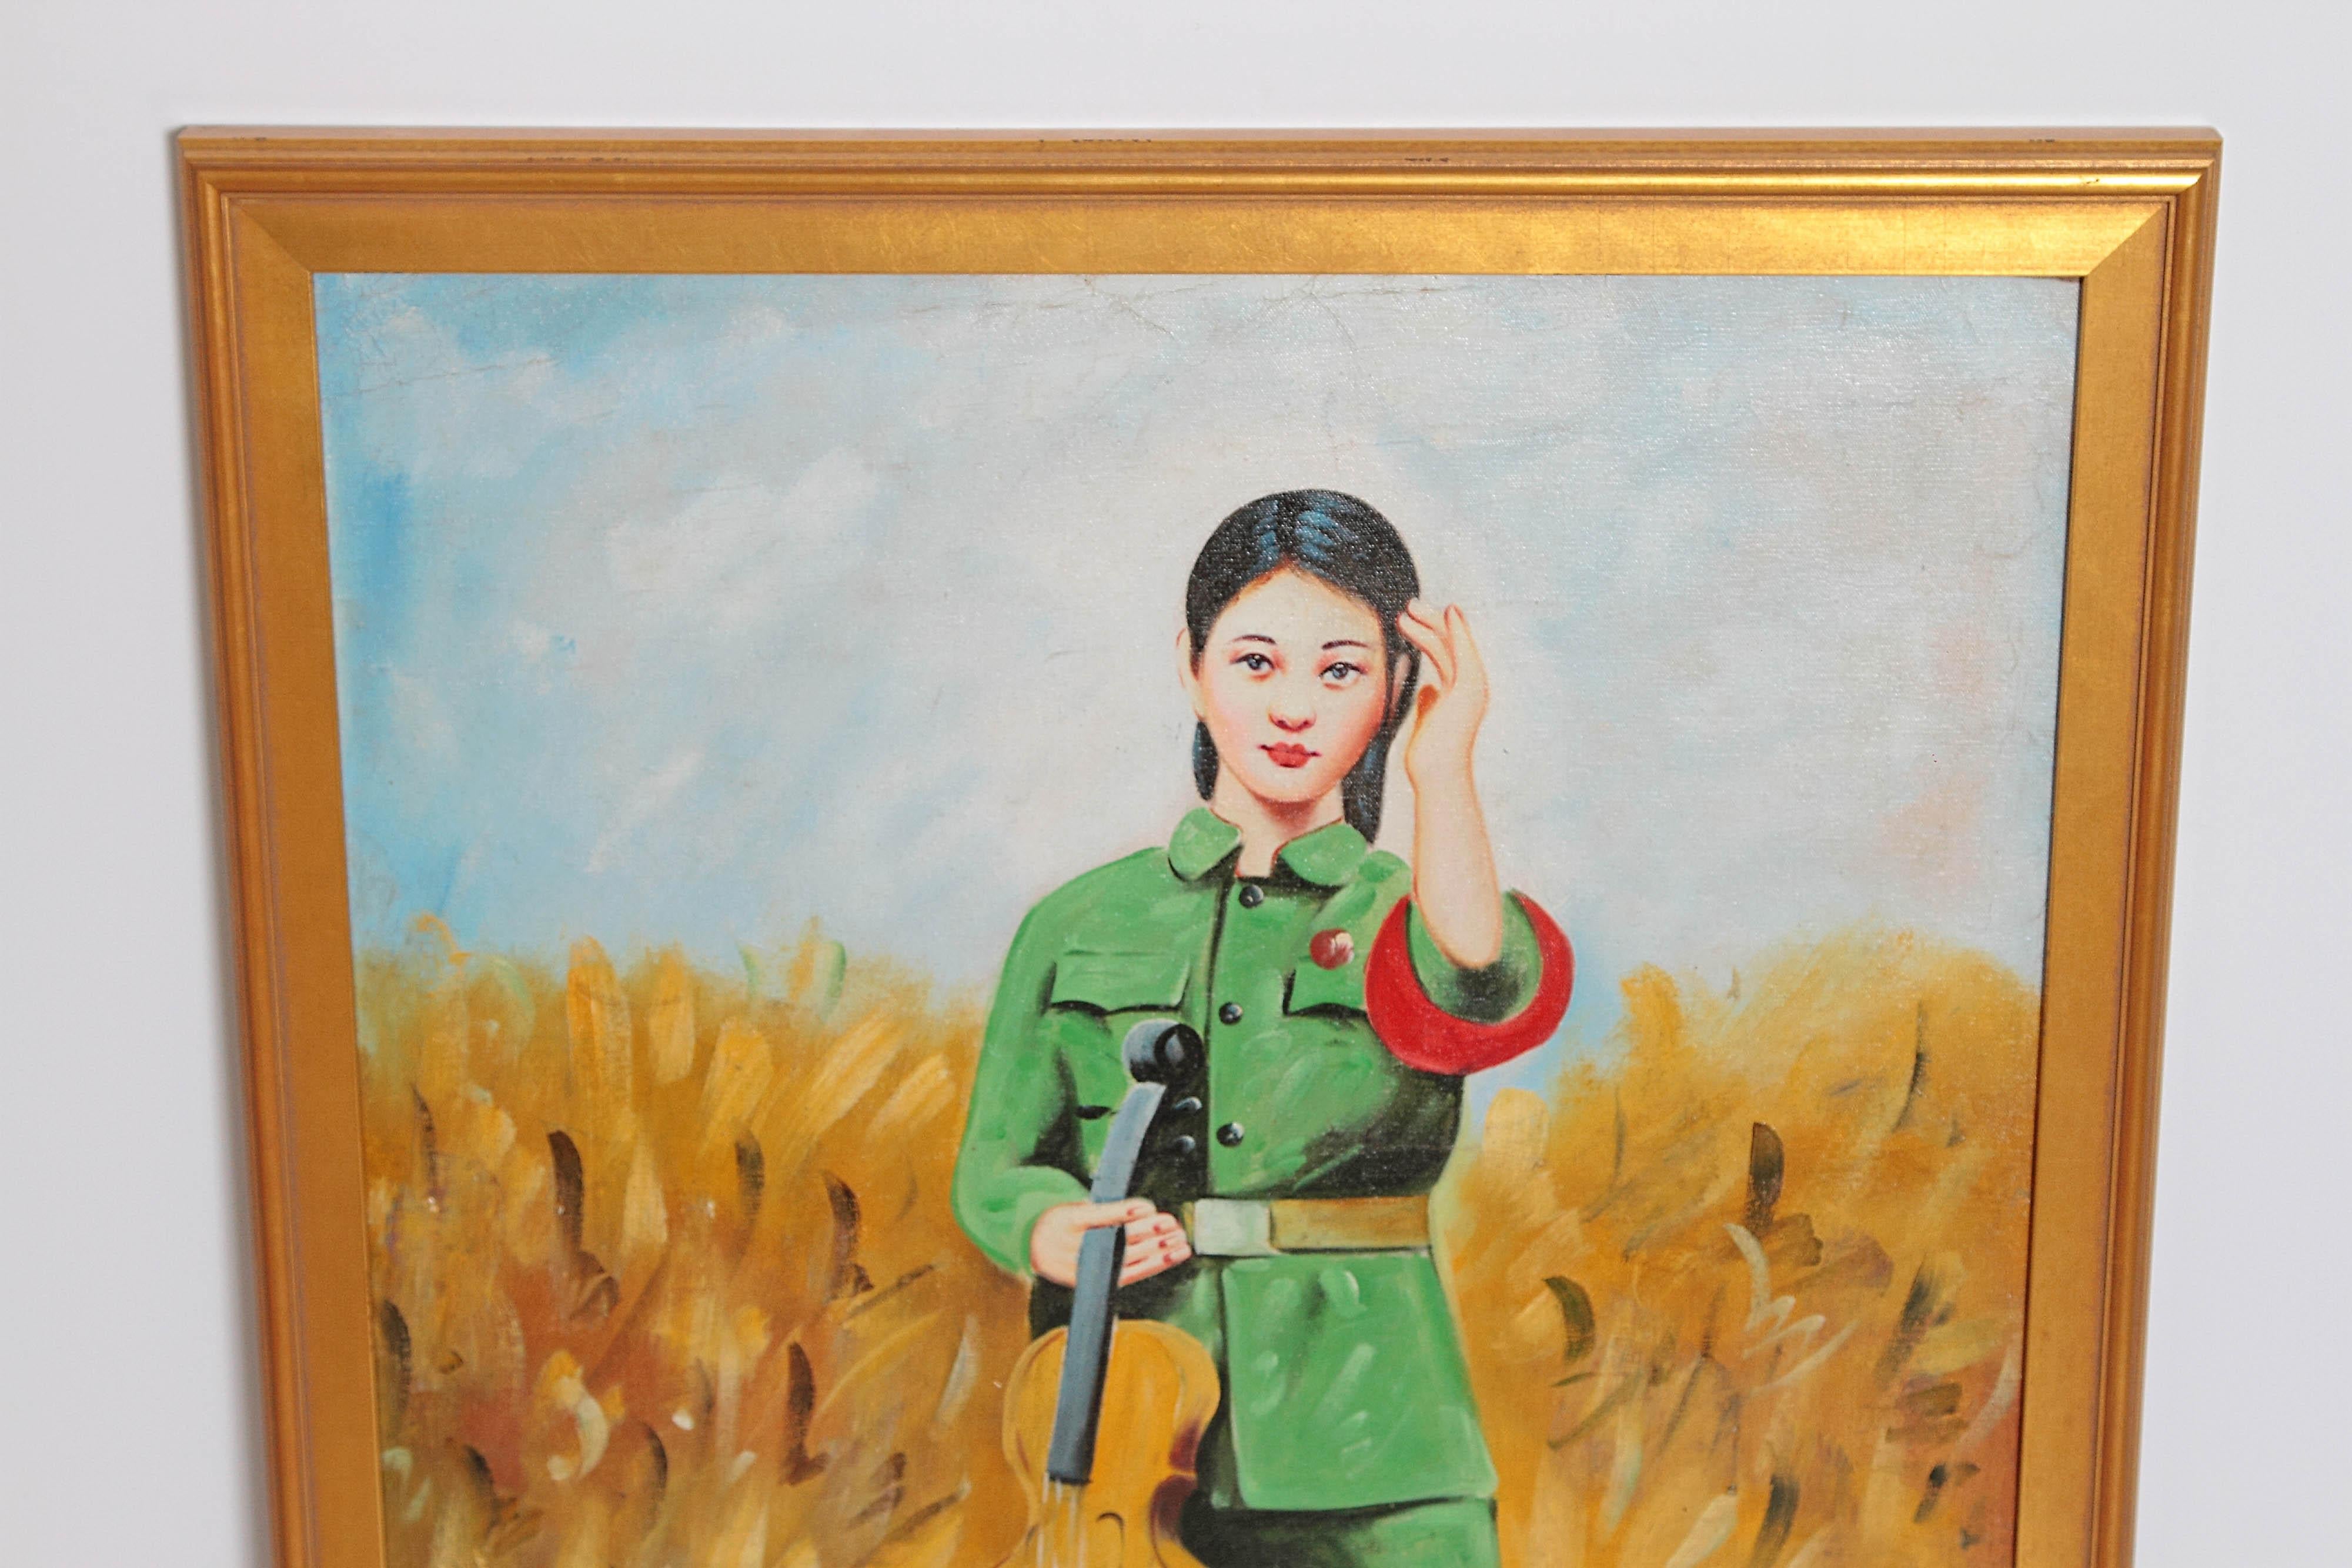 20th Century Chinese Oil Painting of Revolutionary Girl with Violin